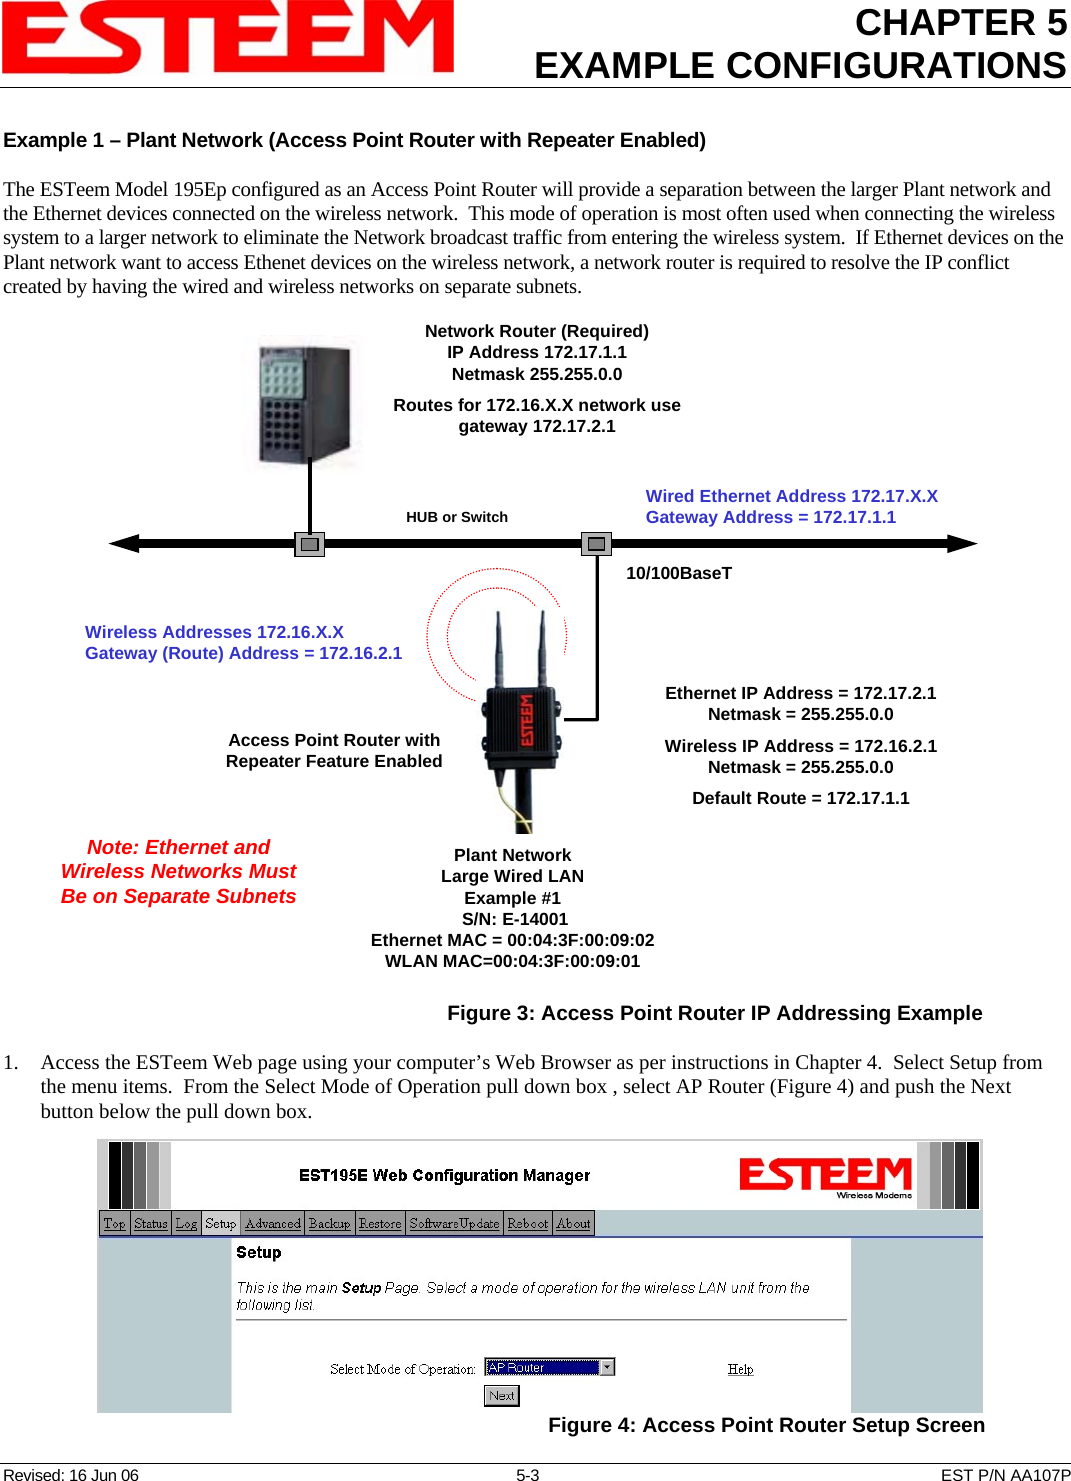 CHAPTER 5 EXAMPLE CONFIGURATIONS    Revised: 16 Jun 06  5-3  EST P/N AA107P Example 1 – Plant Network (Access Point Router with Repeater Enabled)  The ESTeem Model 195Ep configured as an Access Point Router will provide a separation between the larger Plant network and the Ethernet devices connected on the wireless network.  This mode of operation is most often used when connecting the wireless system to a larger network to eliminate the Network broadcast traffic from entering the wireless system.  If Ethernet devices on the Plant network want to access Ethenet devices on the wireless network, a network router is required to resolve the IP conflict created by having the wired and wireless networks on separate subnets. Access Point Router withRepeater Feature Enabled10/100BaseTHUB or SwitchPlant NetworkLarge Wired LANExample #1 S/N: E-14001Ethernet MAC = 00:04:3F:00:09:02WLAN MAC=00:04:3F:00:09:01Network Router (Required)IP Address 172.17.1.1Netmask 255.255.0.0Routes for 172.16.X.X network usegateway 172.17.2.1Wired Ethernet Address 172.17.X.XGateway Address = 172.17.1.1Ethernet IP Address = 172.17.2.1Netmask = 255.255.0.0Wireless IP Address = 172.16.2.1Netmask = 255.255.0.0Default Route = 172.17.1.1Wireless Addresses 172.16.X.XGateway (Route) Address = 172.16.2.1Note: Ethernet andWireless Networks MustBe on Separate Subnets  Figure 3: Access Point Router IP Addressing Example 1. Access the ESTeem Web page using your computer’s Web Browser as per instructions in Chapter 4.  Select Setup from the menu items.  From the Select Mode of Operation pull down box , select AP Router (Figure 4) and push the Next button below the pull down box.  Figure 4: Access Point Router Setup Screen 